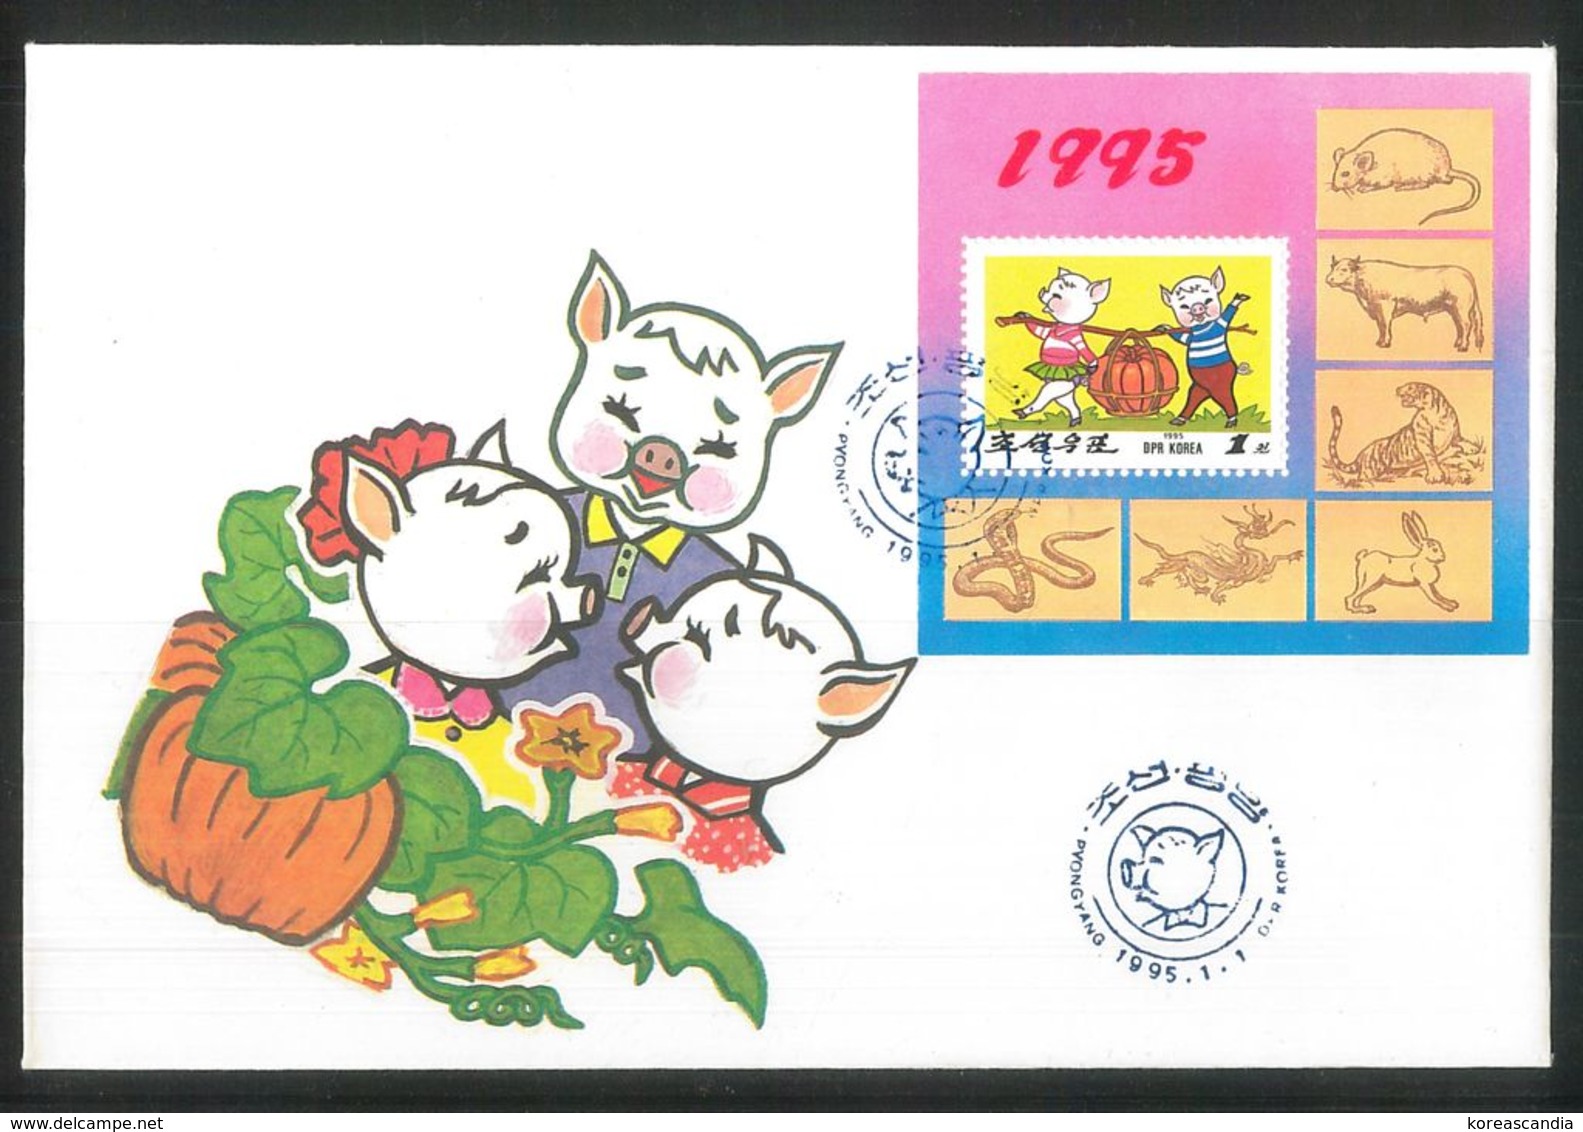 NORTH KOREA 1995 NEW YEAR OF THE PIG JUCHE 84 SHEETLET (II) FDC - Nouvel An